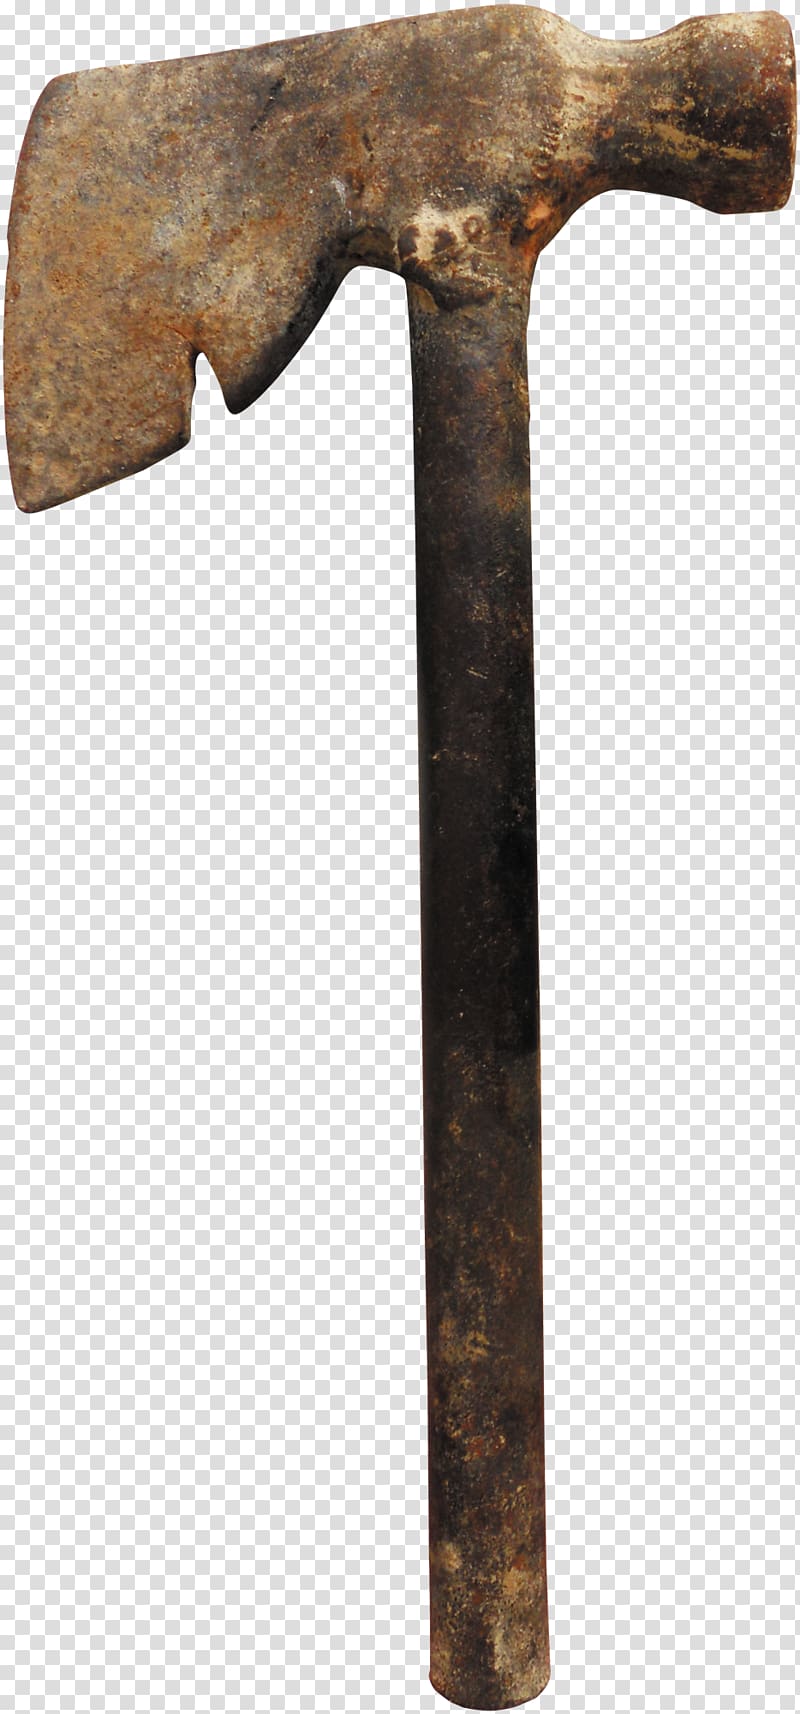 Steel Material Splitting maul, Iron ax material free to pull transparent background PNG clipart